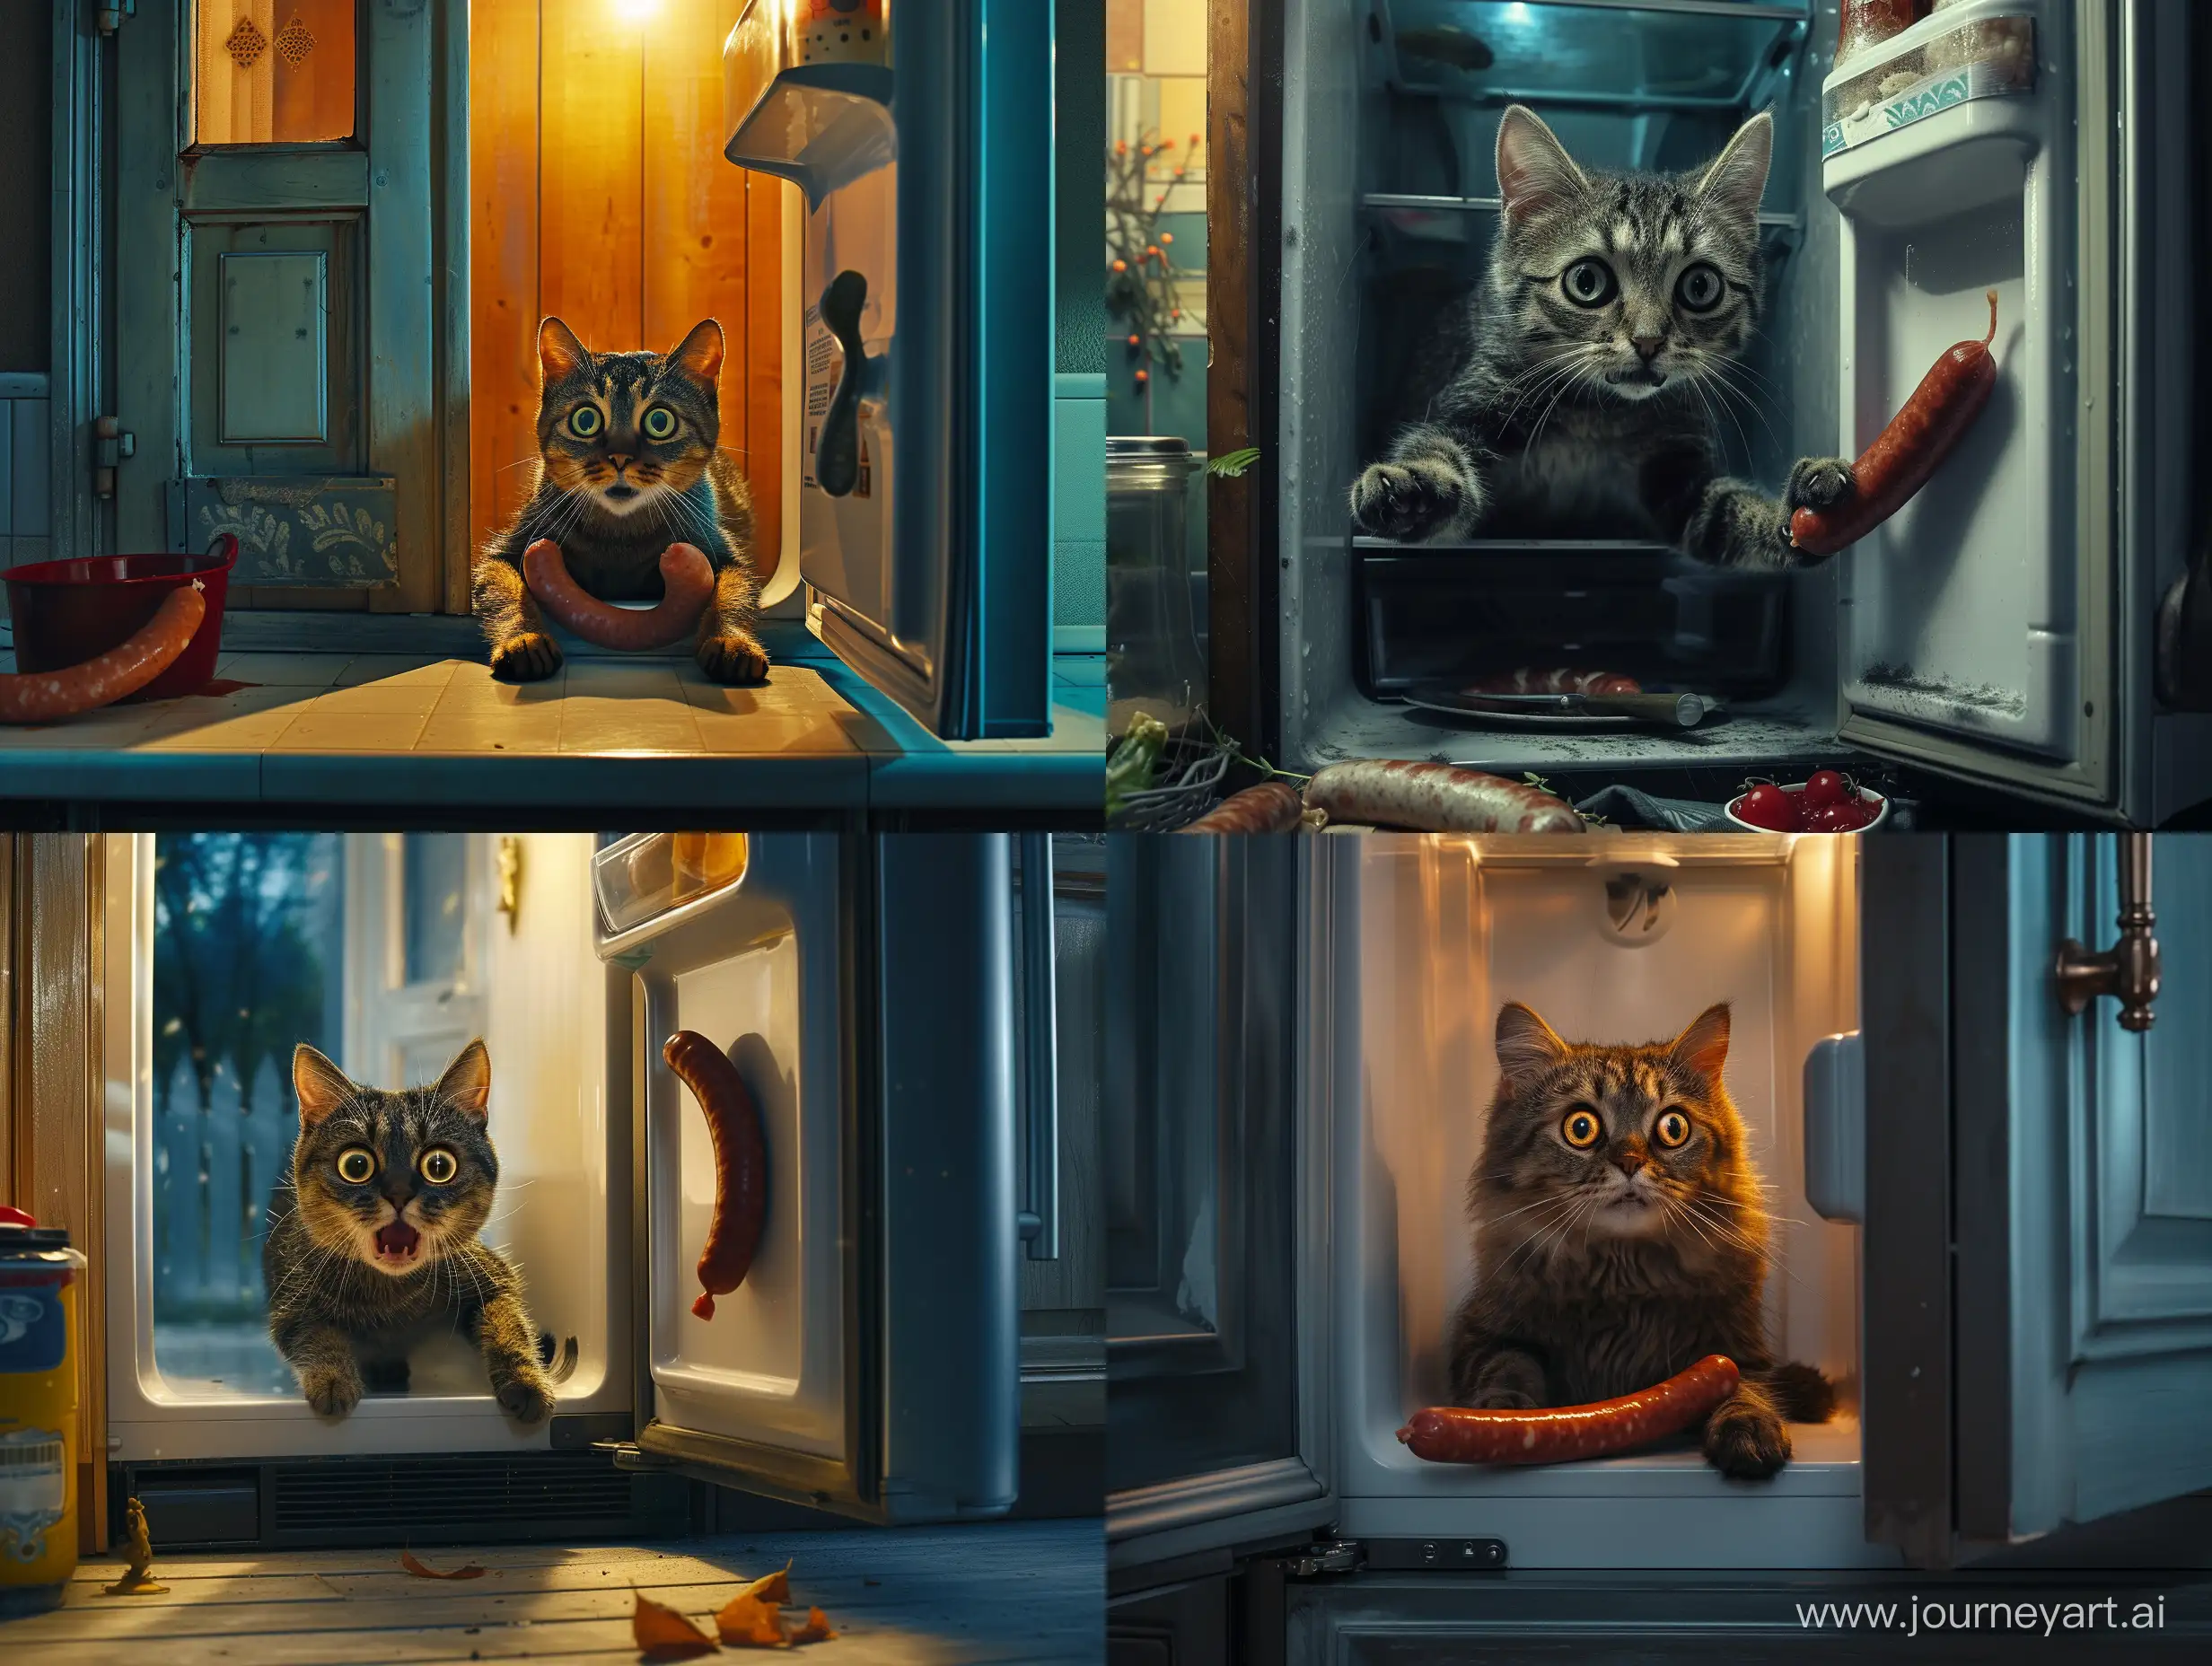 Creative and non-standard advertising, good detail, commercial photography, funny, in this advertisement the cat sneaks into the kitchen at night in order to get into the refrigerator, the ninja cat, humorous advertising, the cat is scared, the door to the refrigerator is opened, the overeated cat looks with frightened eyes, and a sausage is clamped in his paws